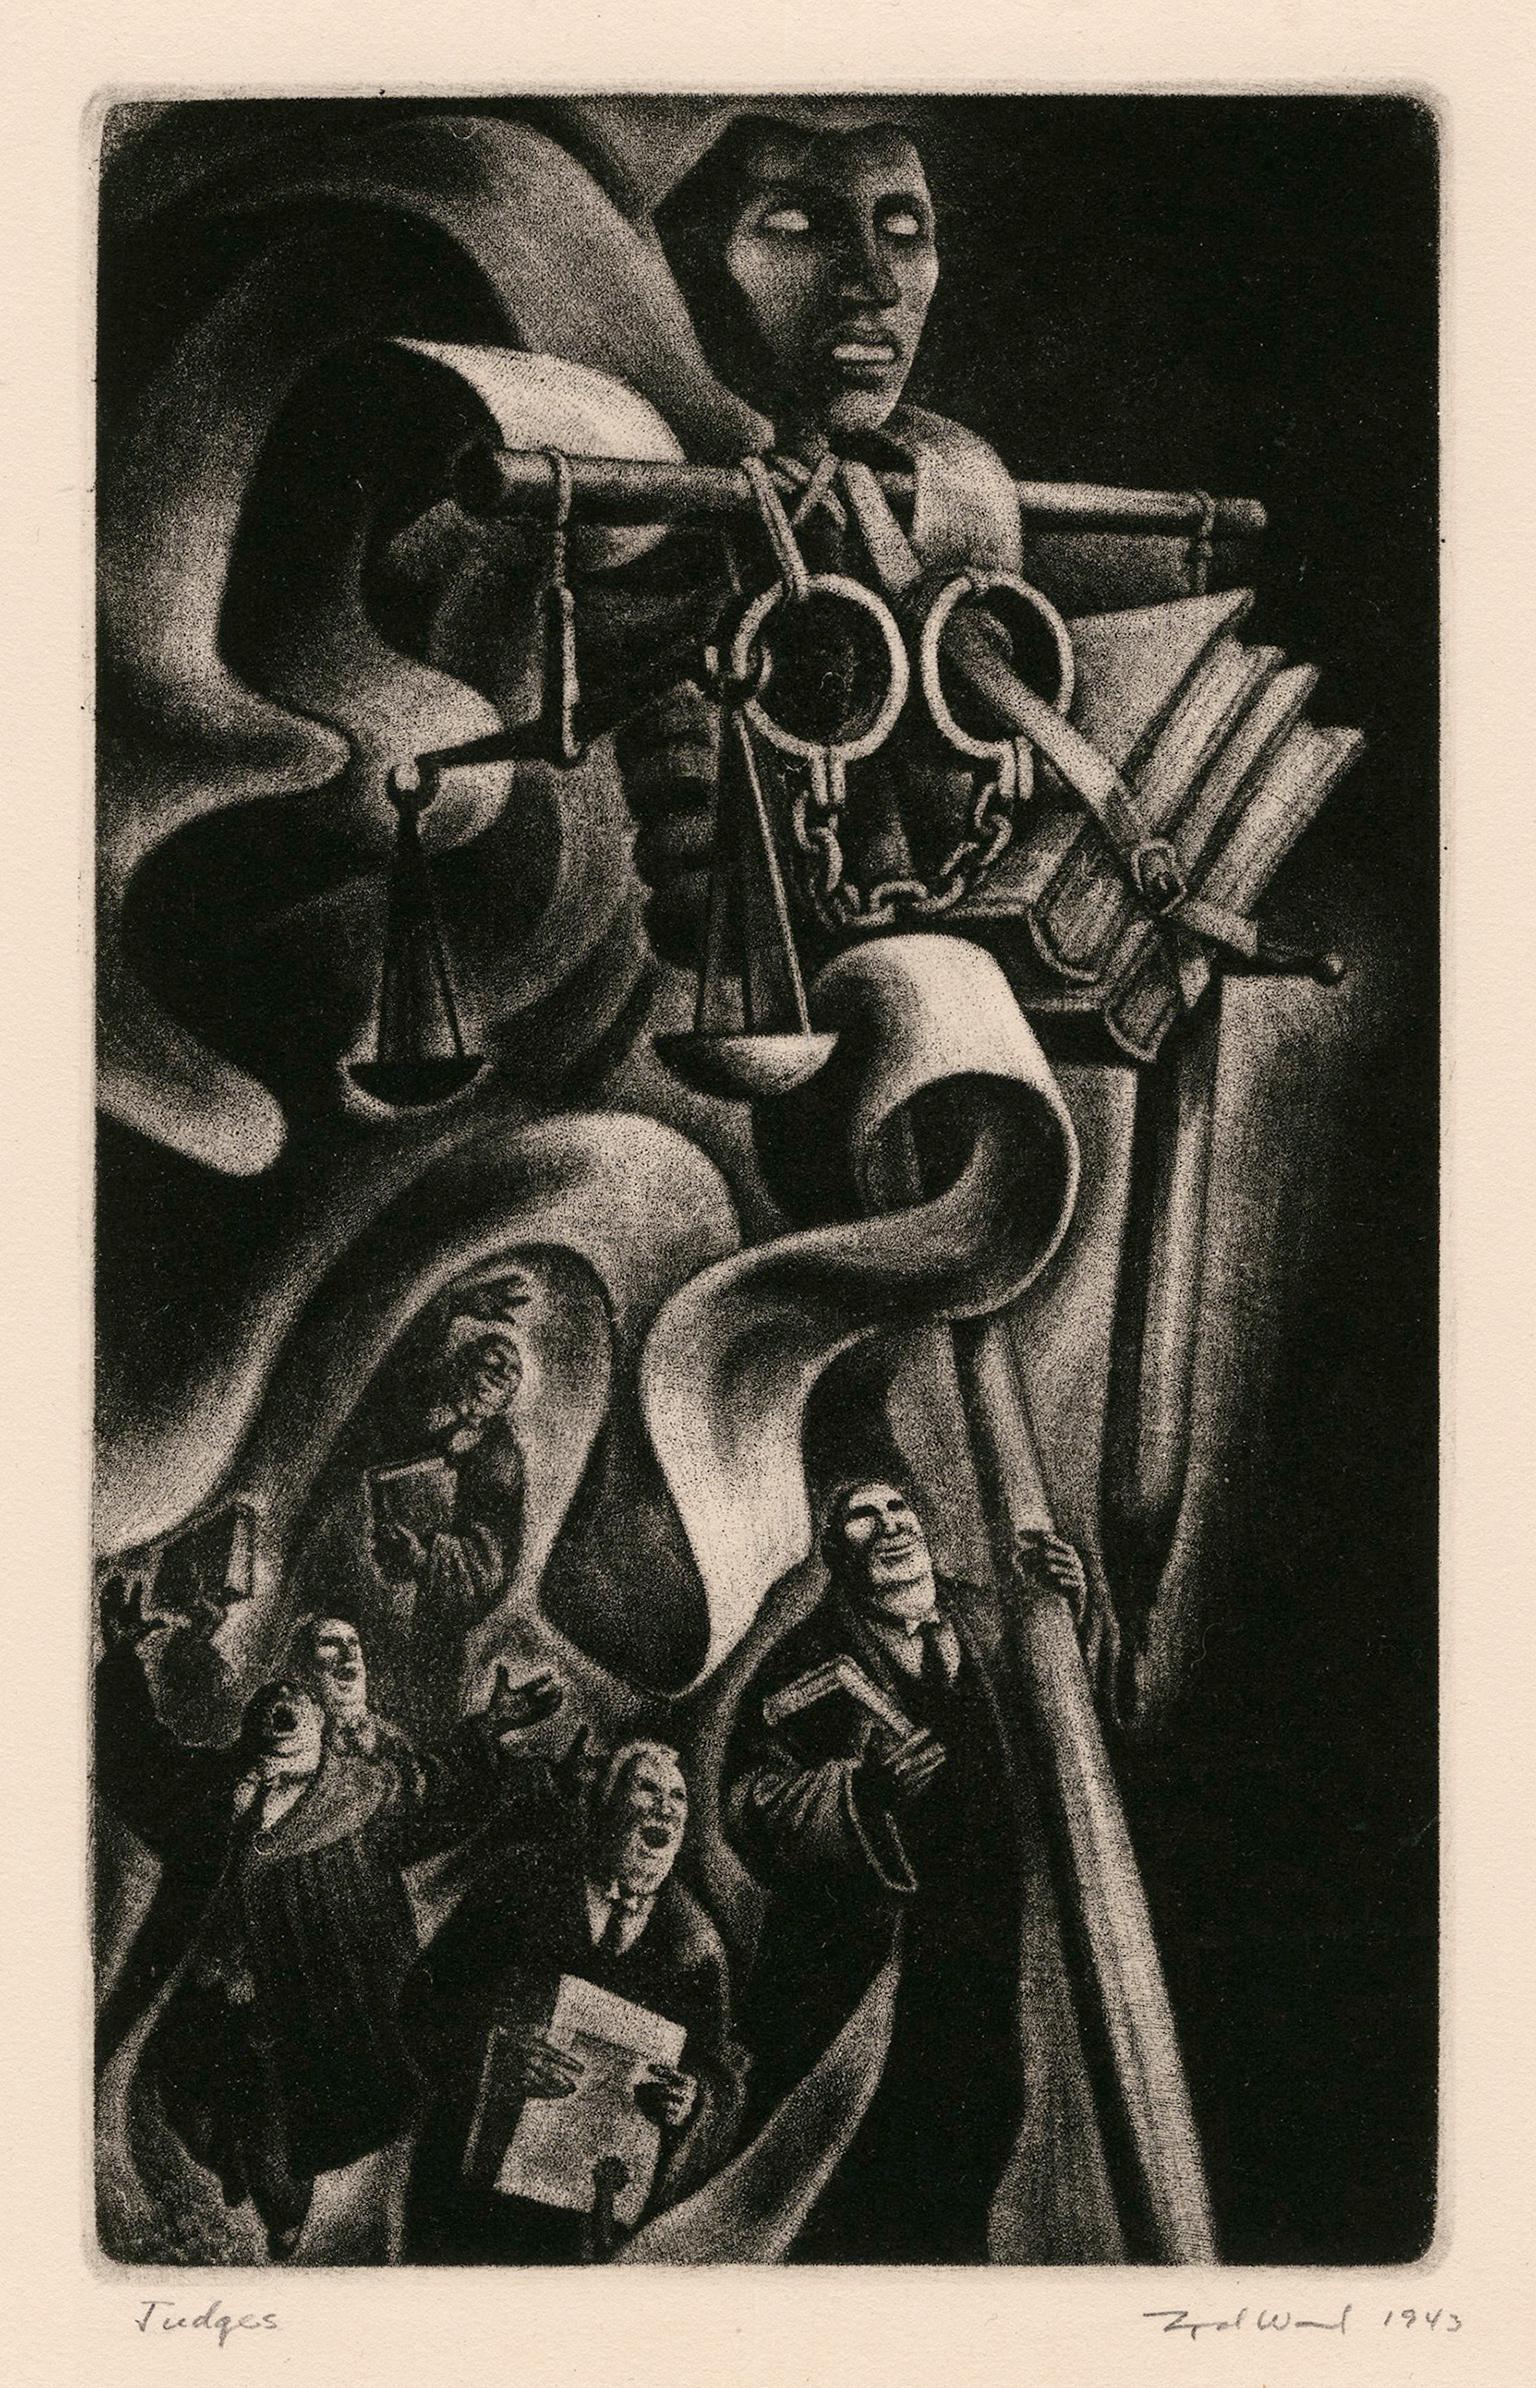 Lynd Ward Figurative Print - 'Judges' from 'In Praise of Folly' — 1940s Graphic Modernism